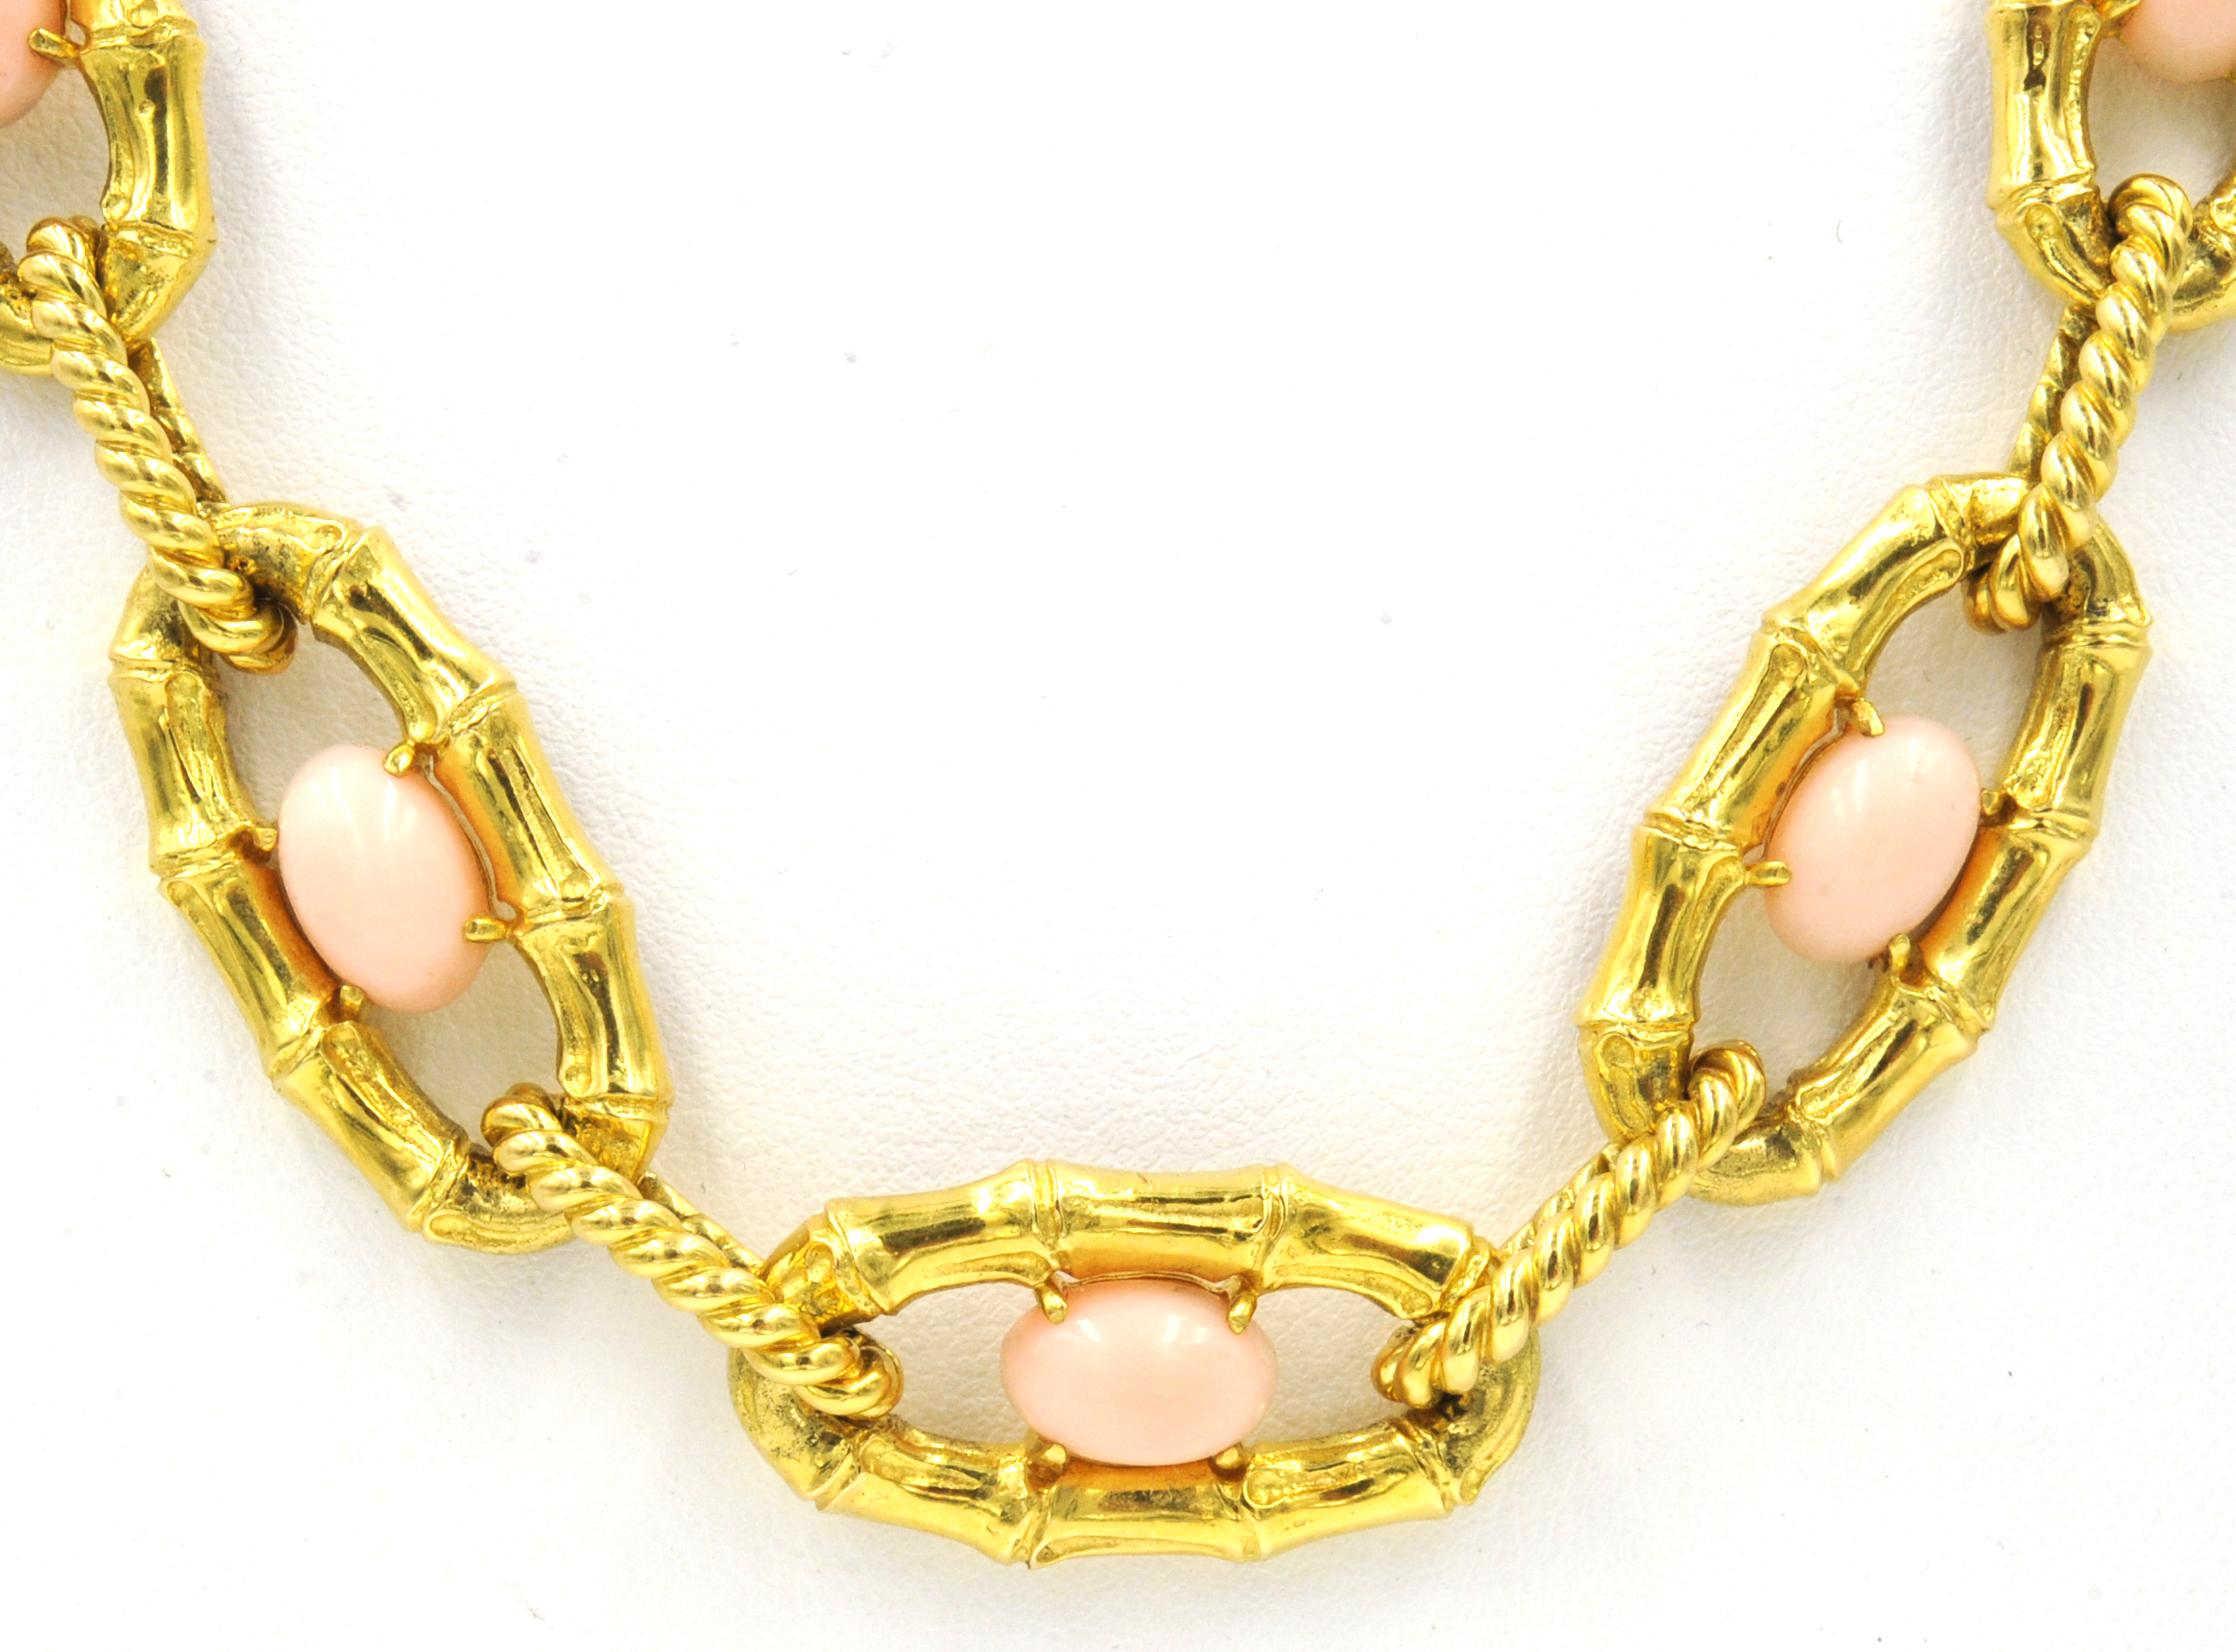 Retro Coral Necklace and Bracelet Bamboo Motif 18 Karat Yellow Gold French Made